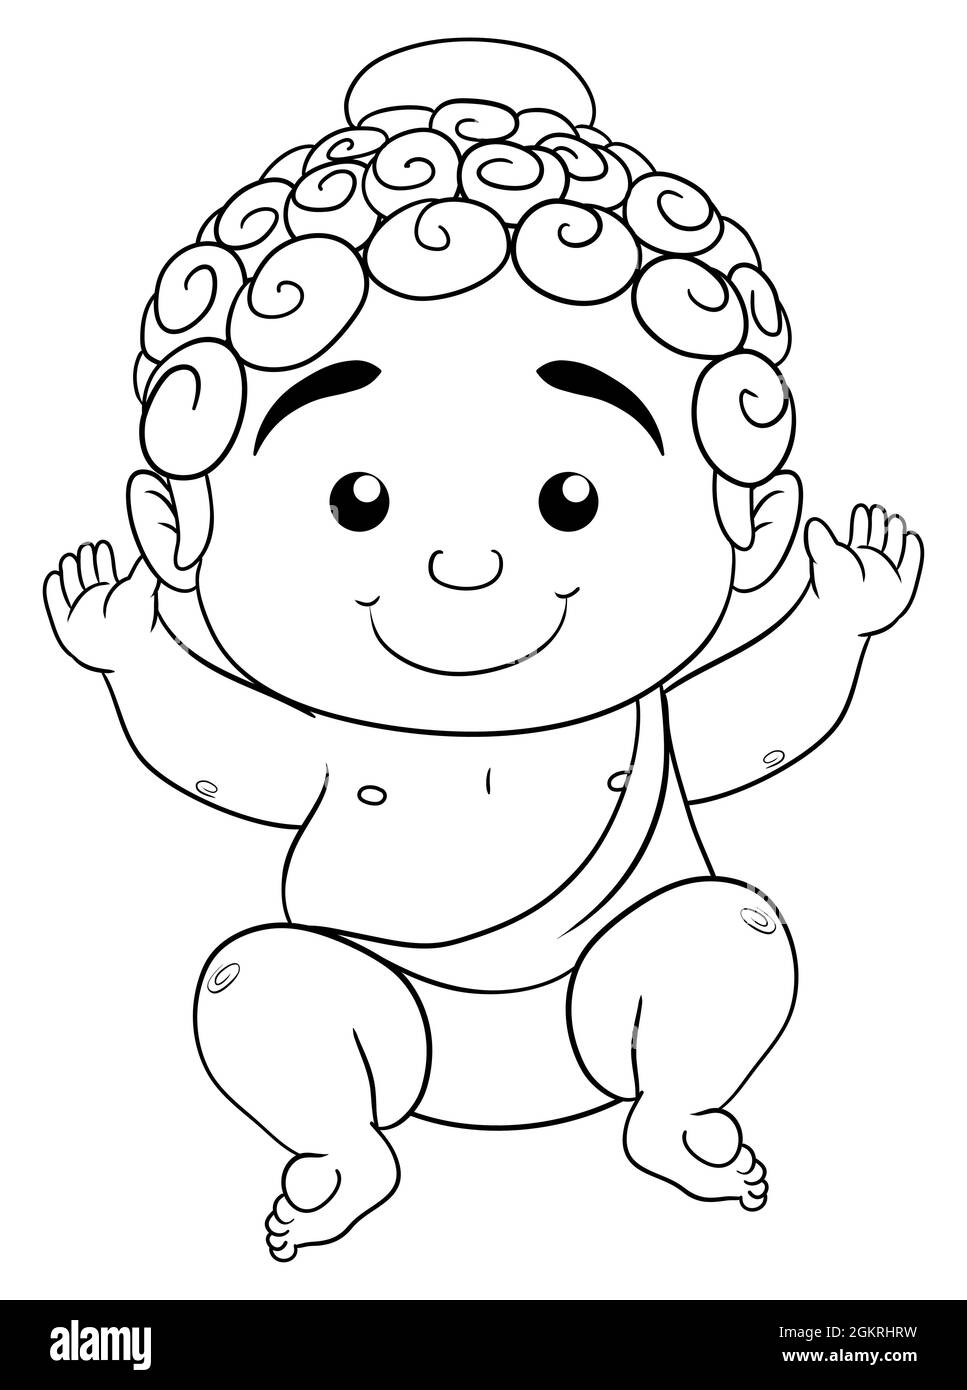 Cute smiling baby Buddha with open arms in cartoon style  to coloring activities. Stock Vector